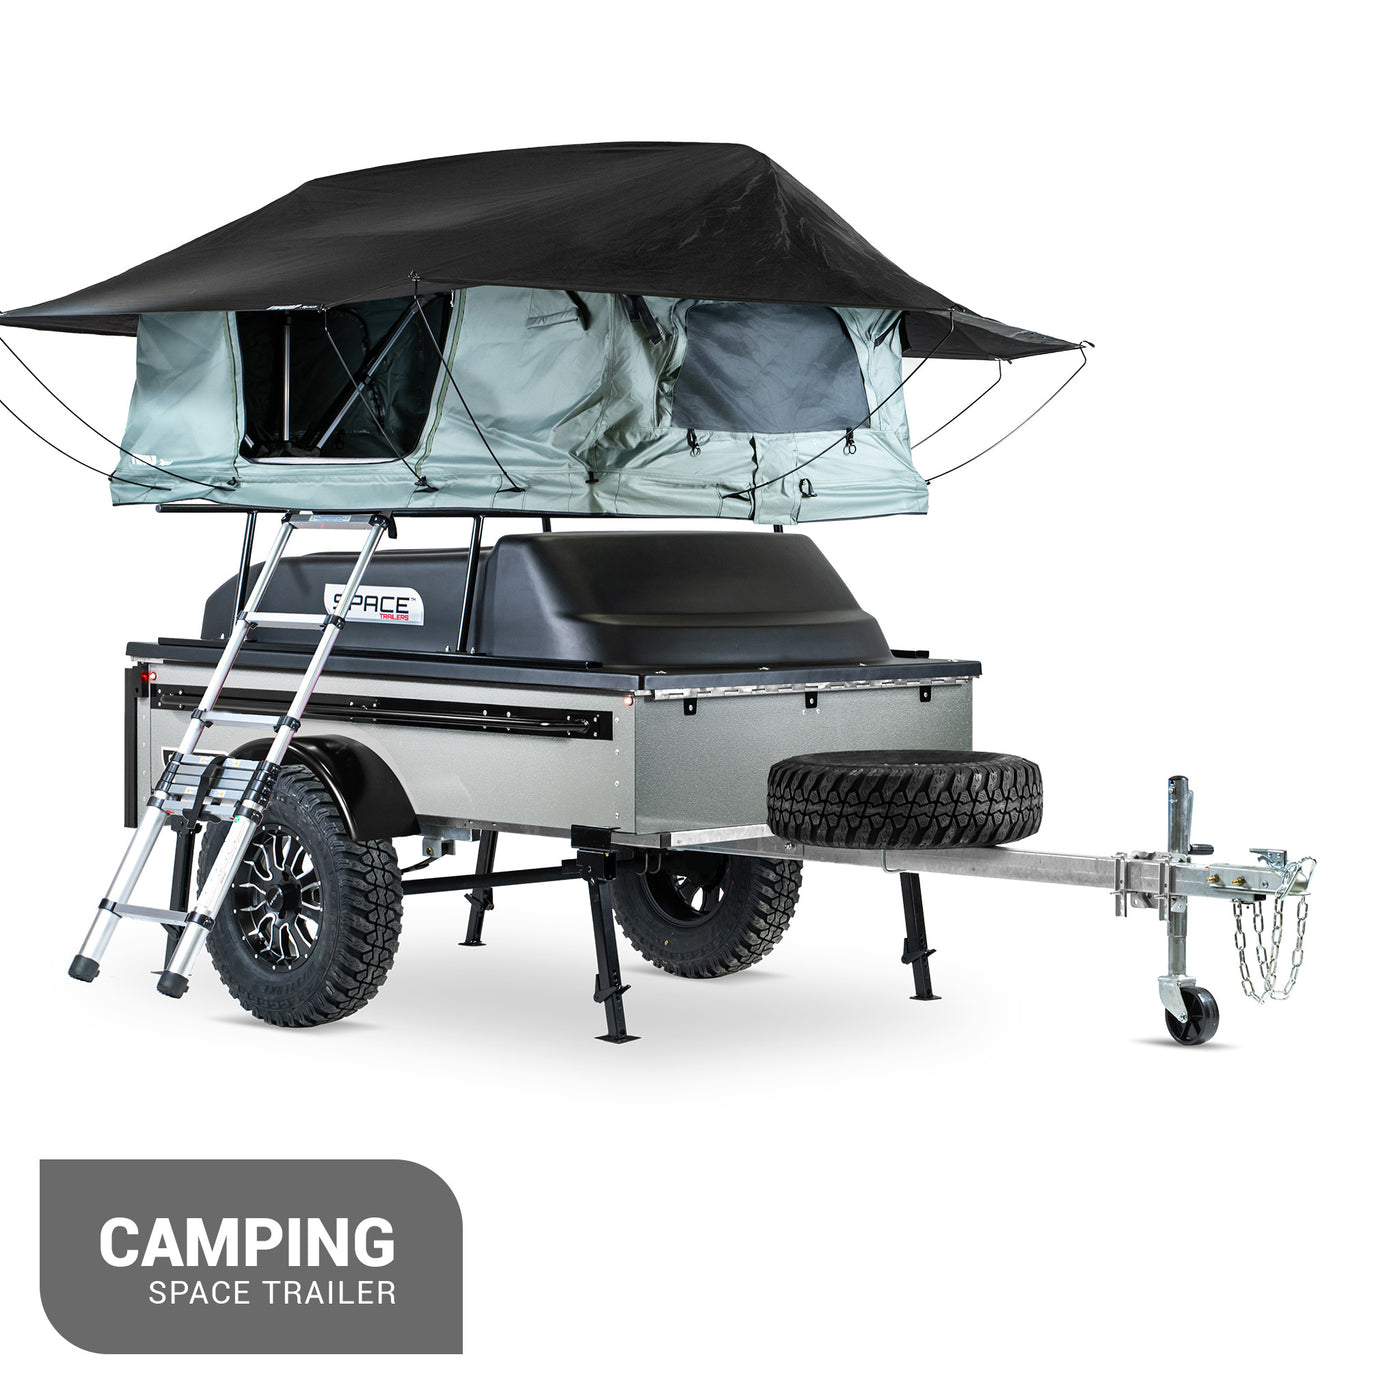 SPACE Trailer - Sport Utility Trailer - Camping Build